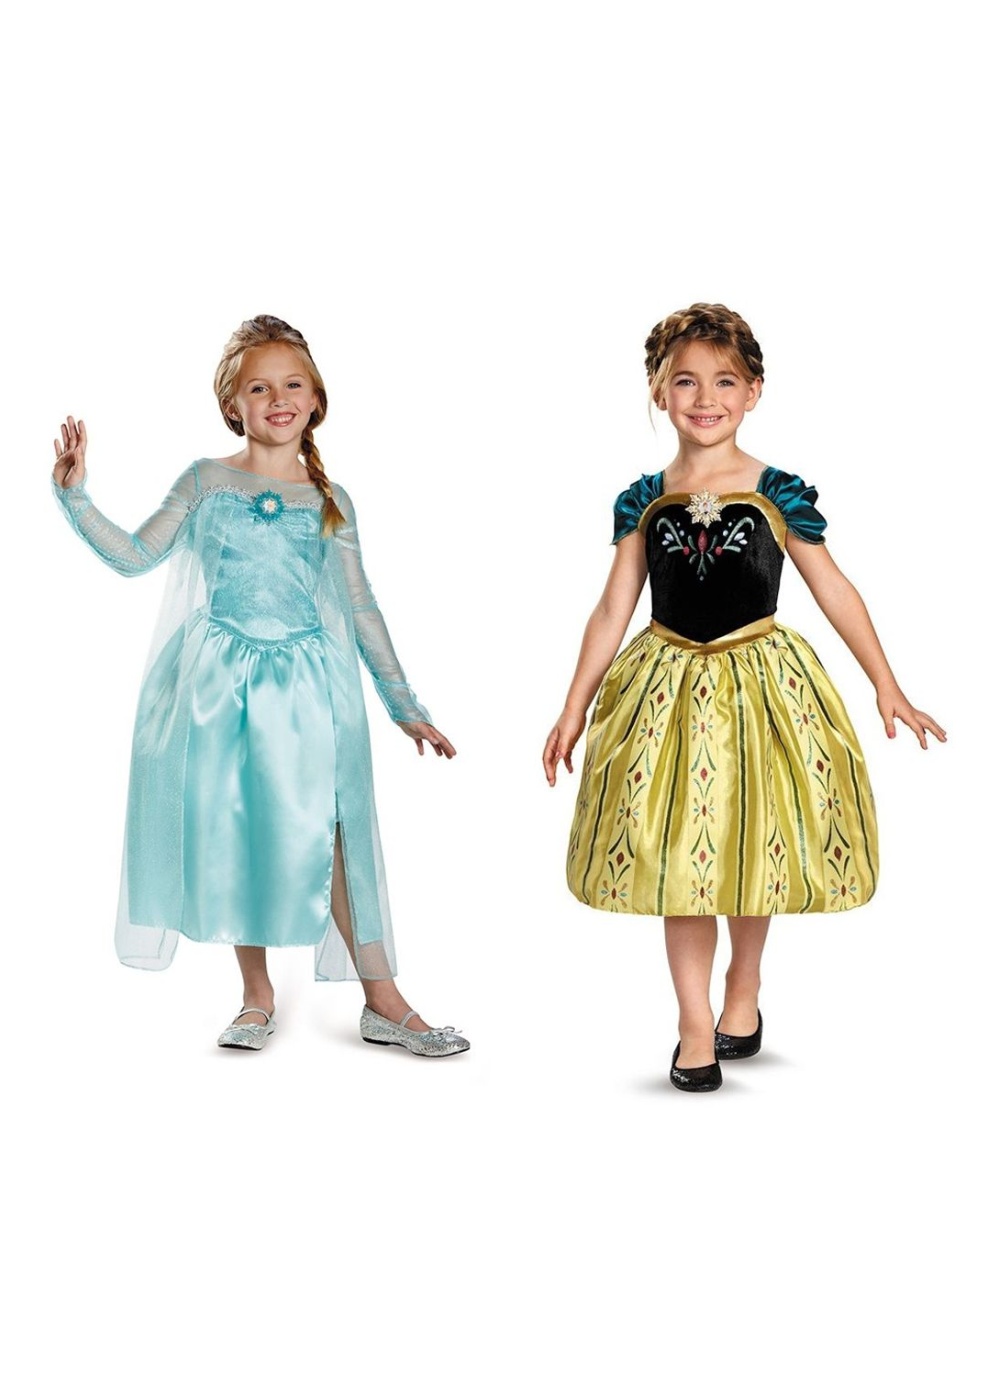 Frozen Anna and Elsa costumes